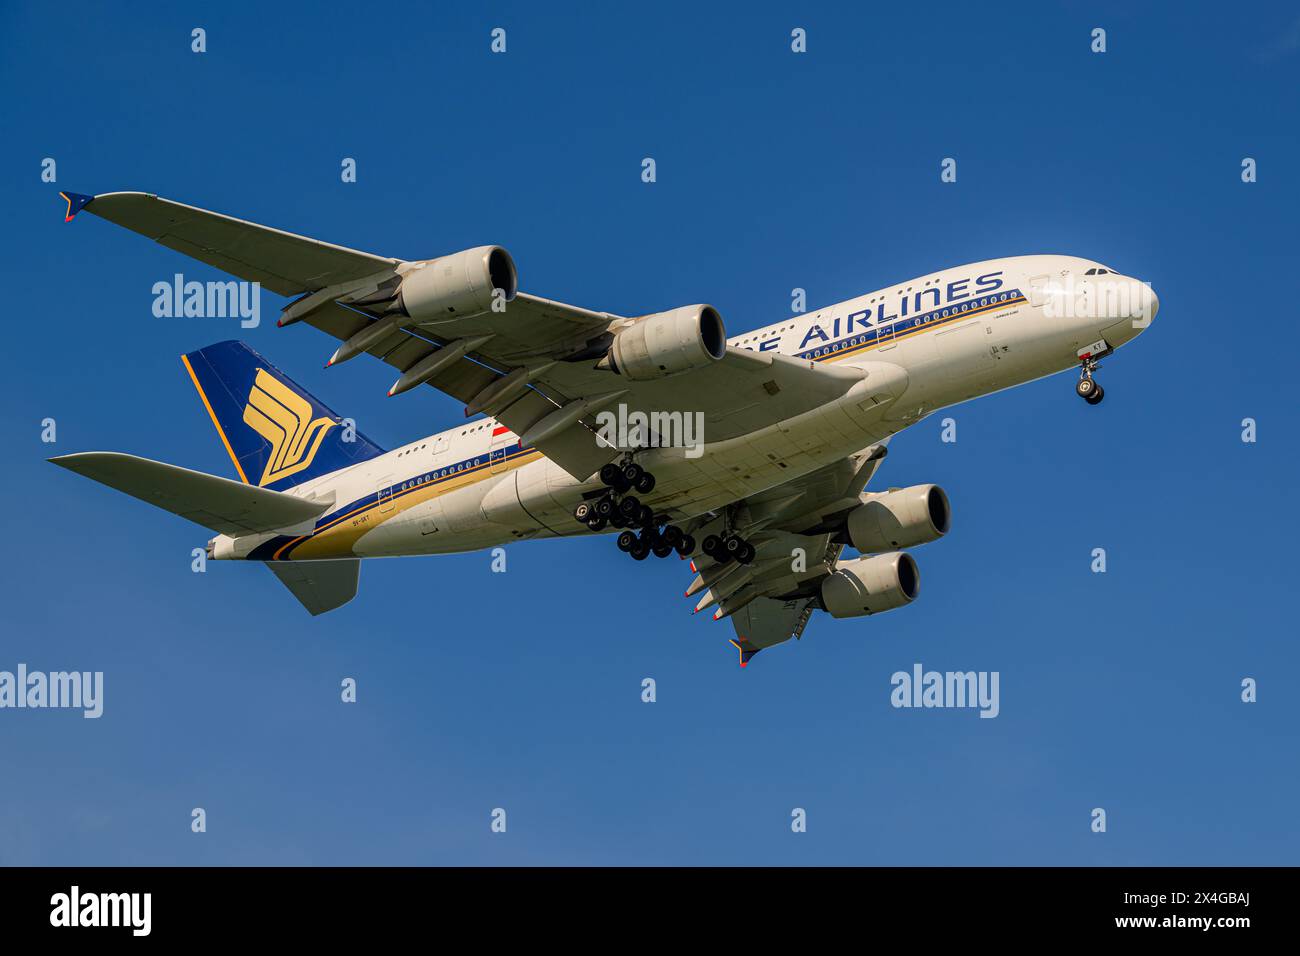 Singapore Airlines, Airbus A380-800, 9V-SKT, on final approach to Singapore Changi airport Stock Photo